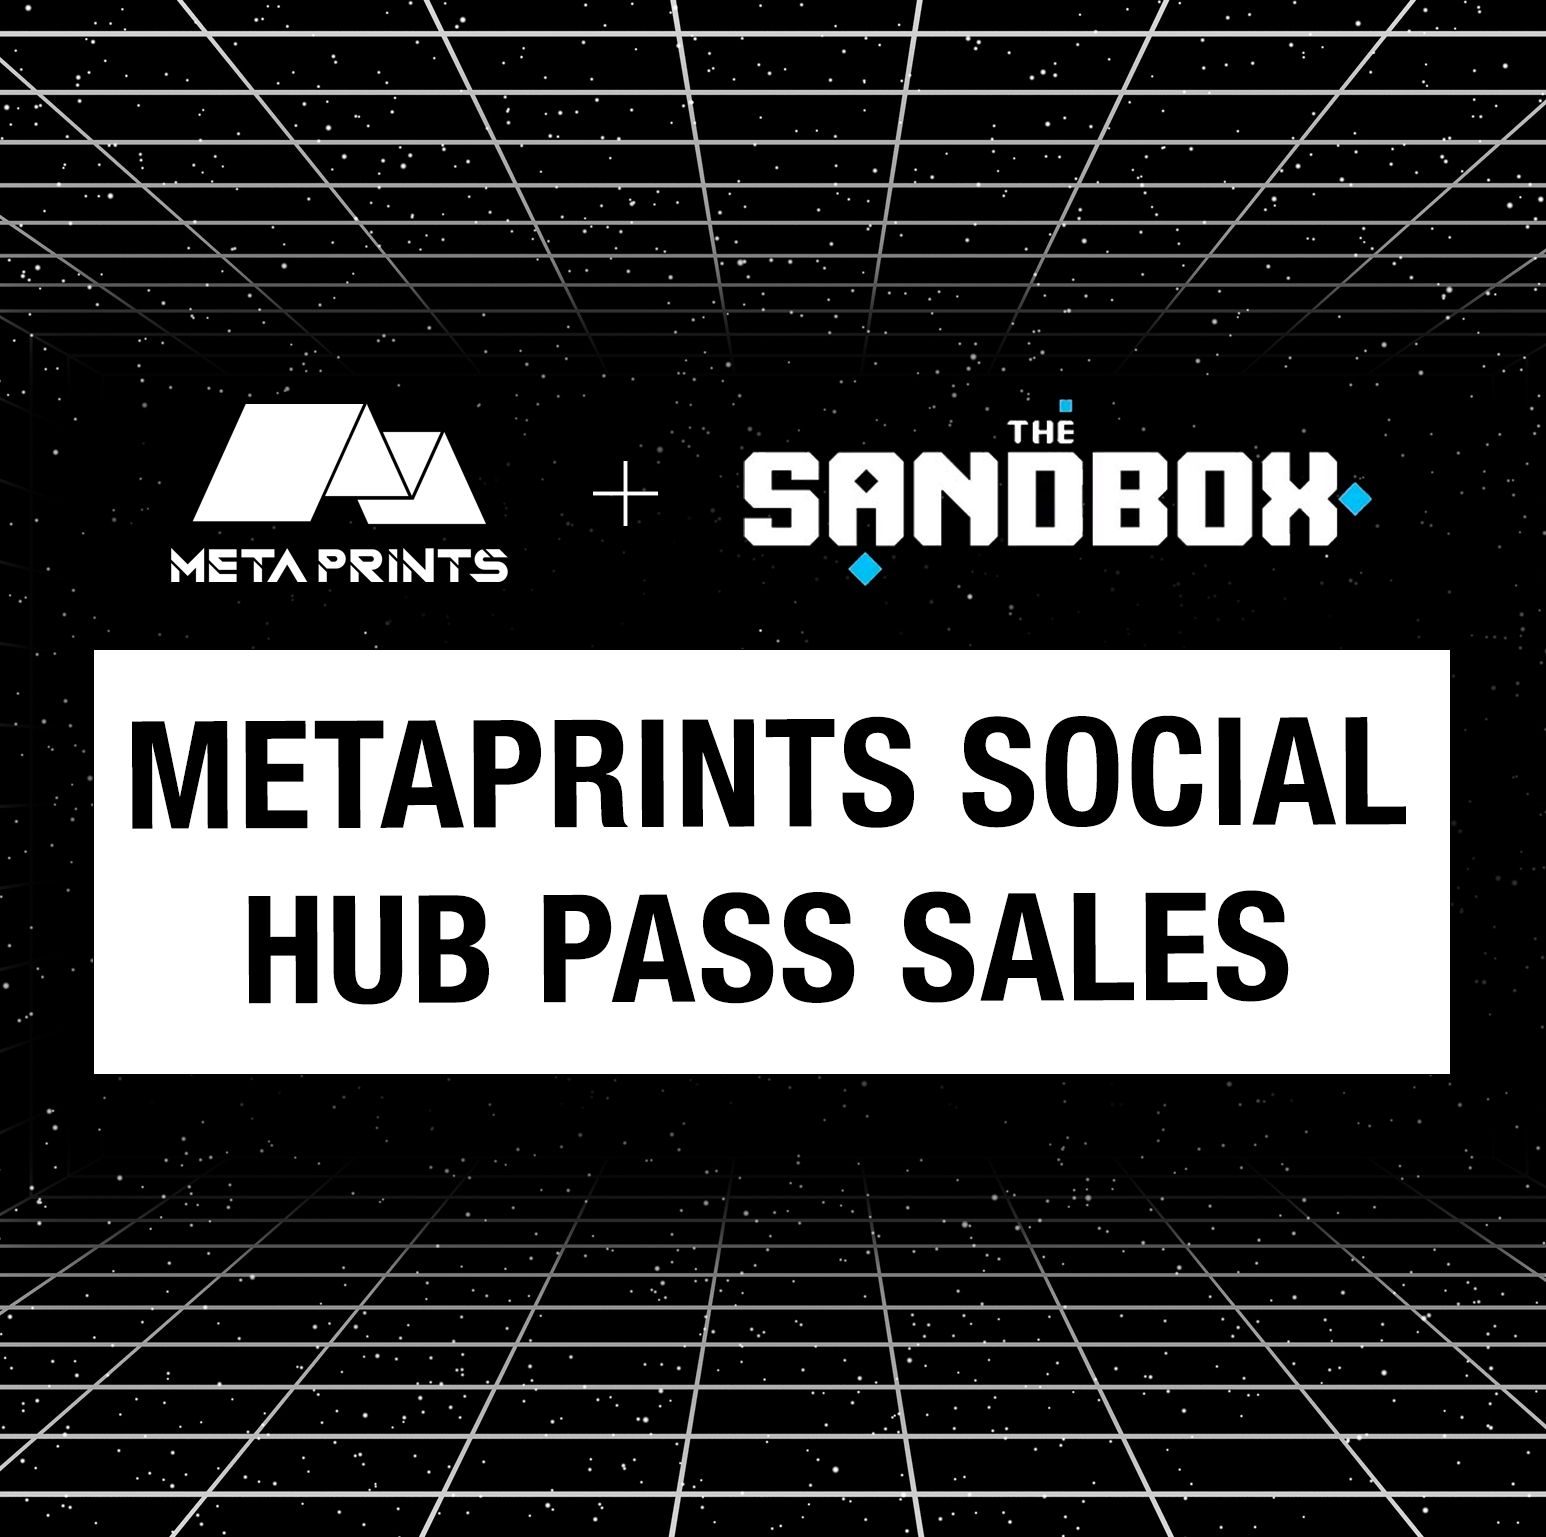 The Latest on the Metaprints Social Hub Pass Sales, Starting July 5th with Crust